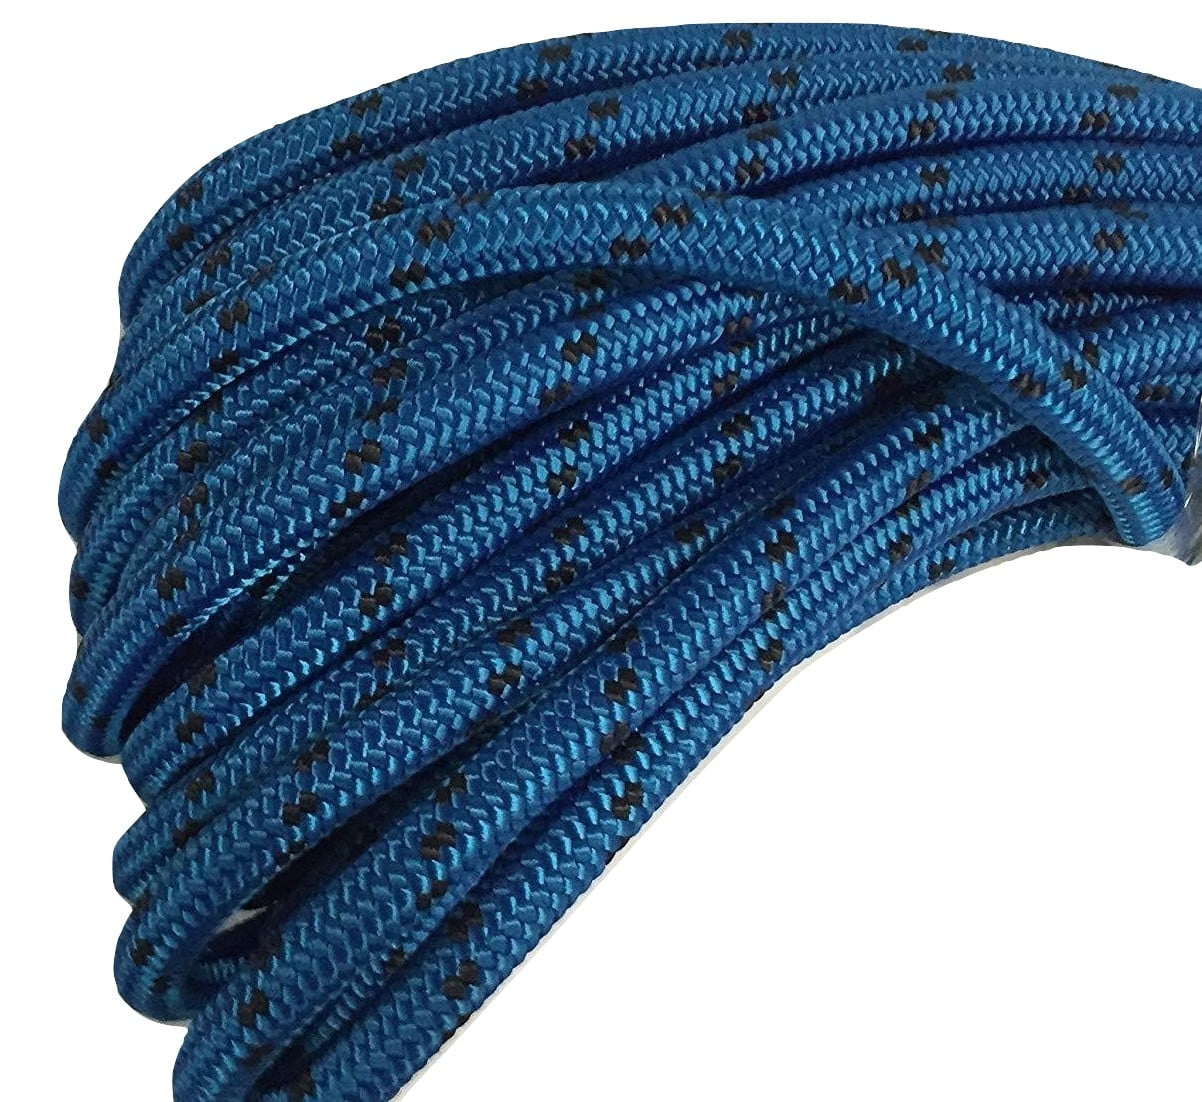 Double Braid Polyester Rope Arborist Bull Rope Tree Work Utility All sizes 